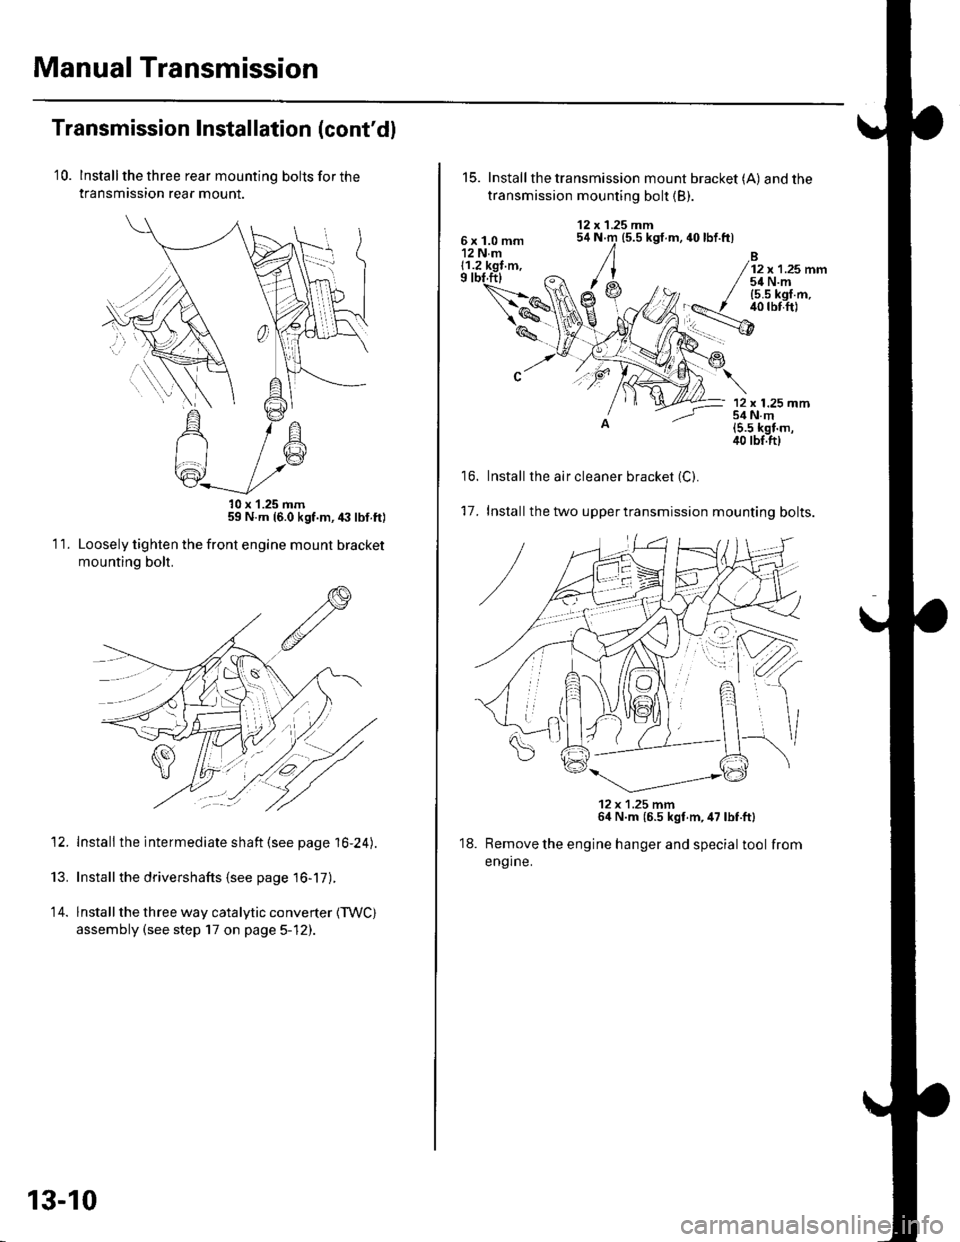 HONDA CIVIC 2003 7.G User Guide Manual Transmission
Transmission Installation (contdl
10. Installthe three rear mounting bolls for the
transmission rear mount.
59 N.m (6.0 kgf.m,43 tbf.ft)
Loosely tighten the front engine mount br